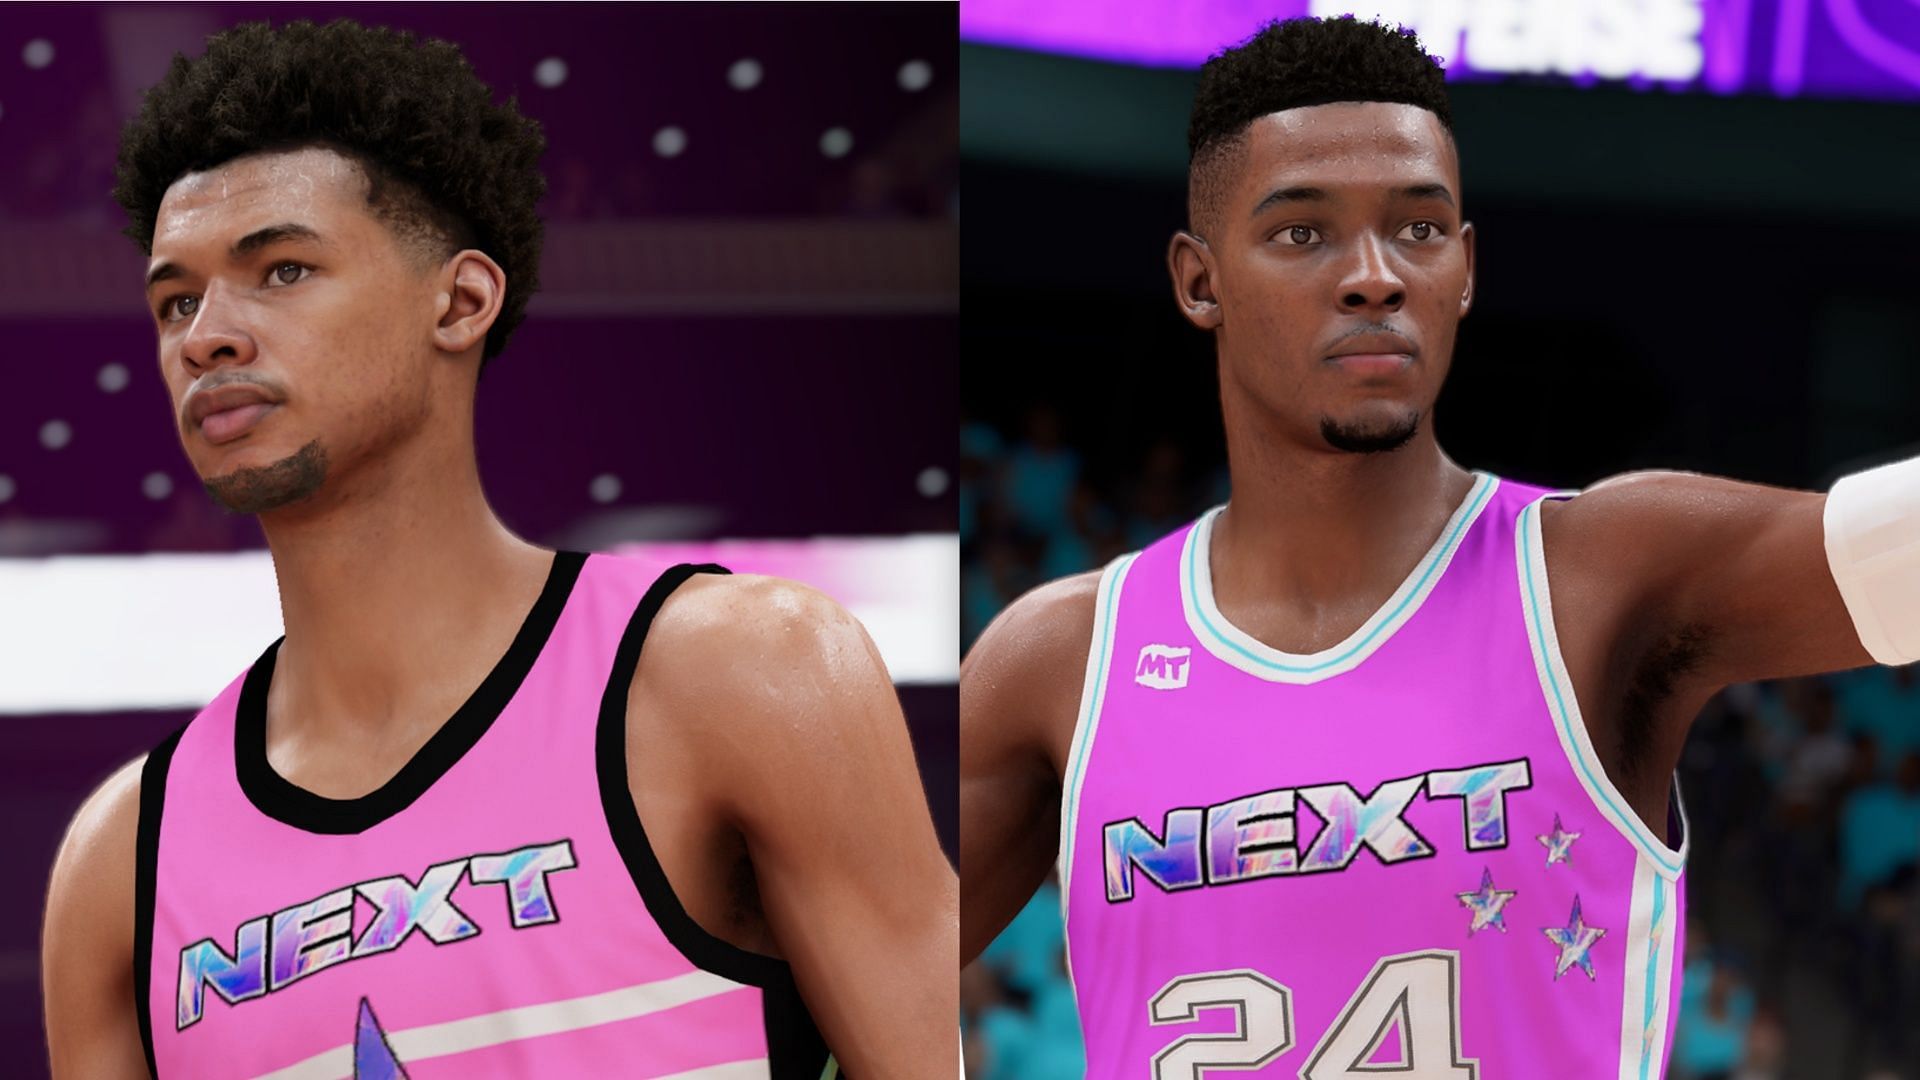 Both Wembanyama and Miller are available in NBA 2K23 packs (Image via 2K Sports)